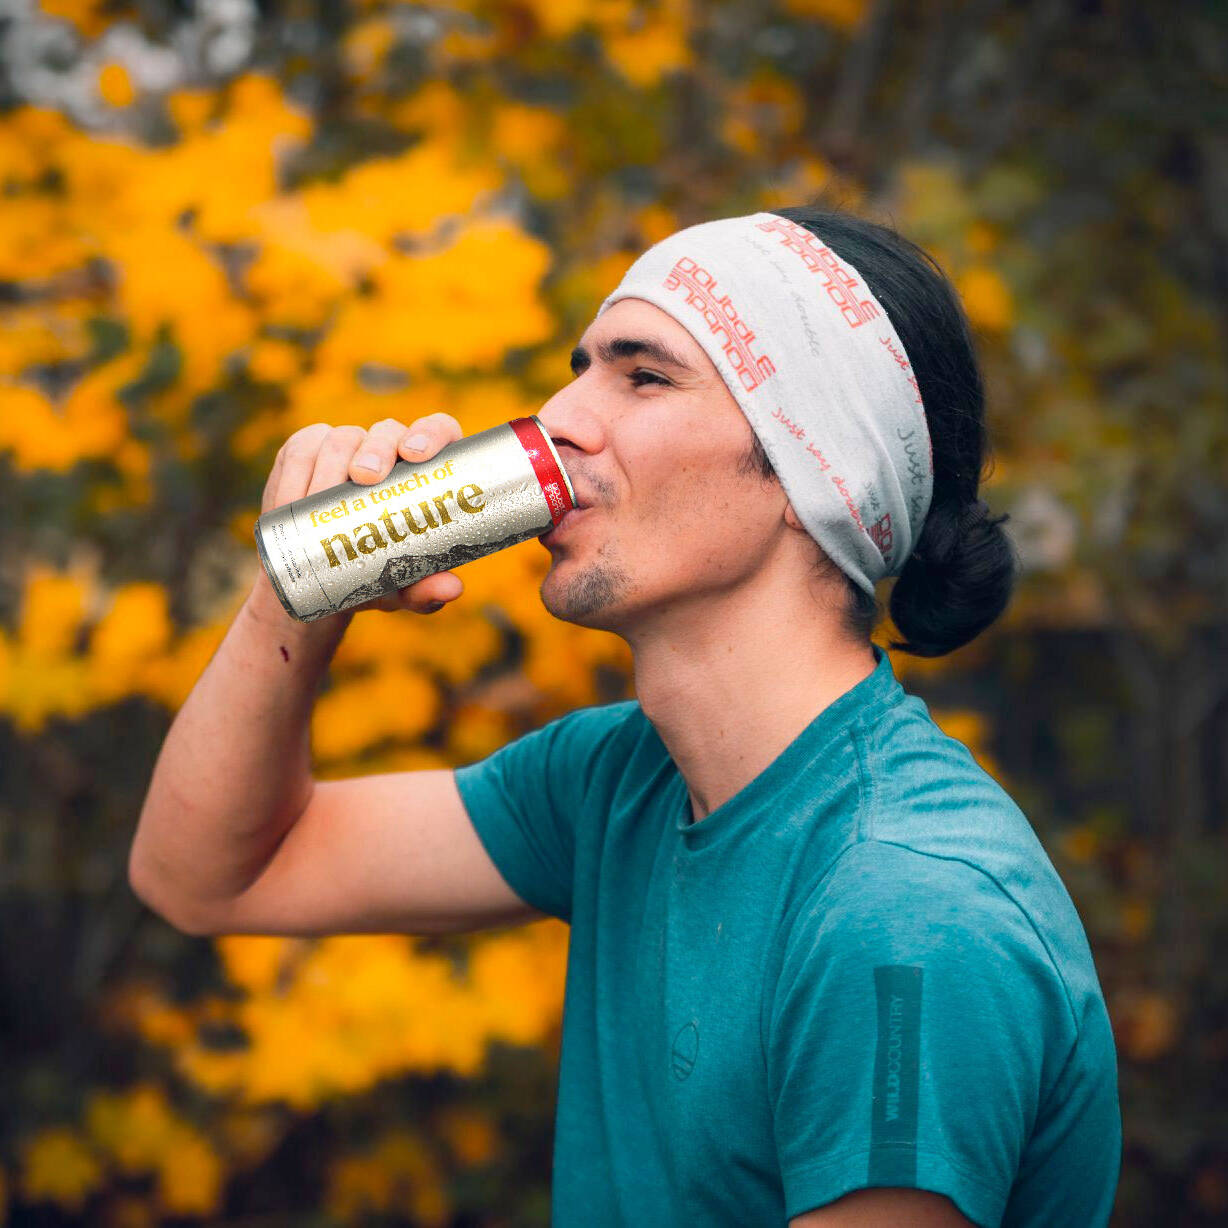 Healthy alternative to the energy drink